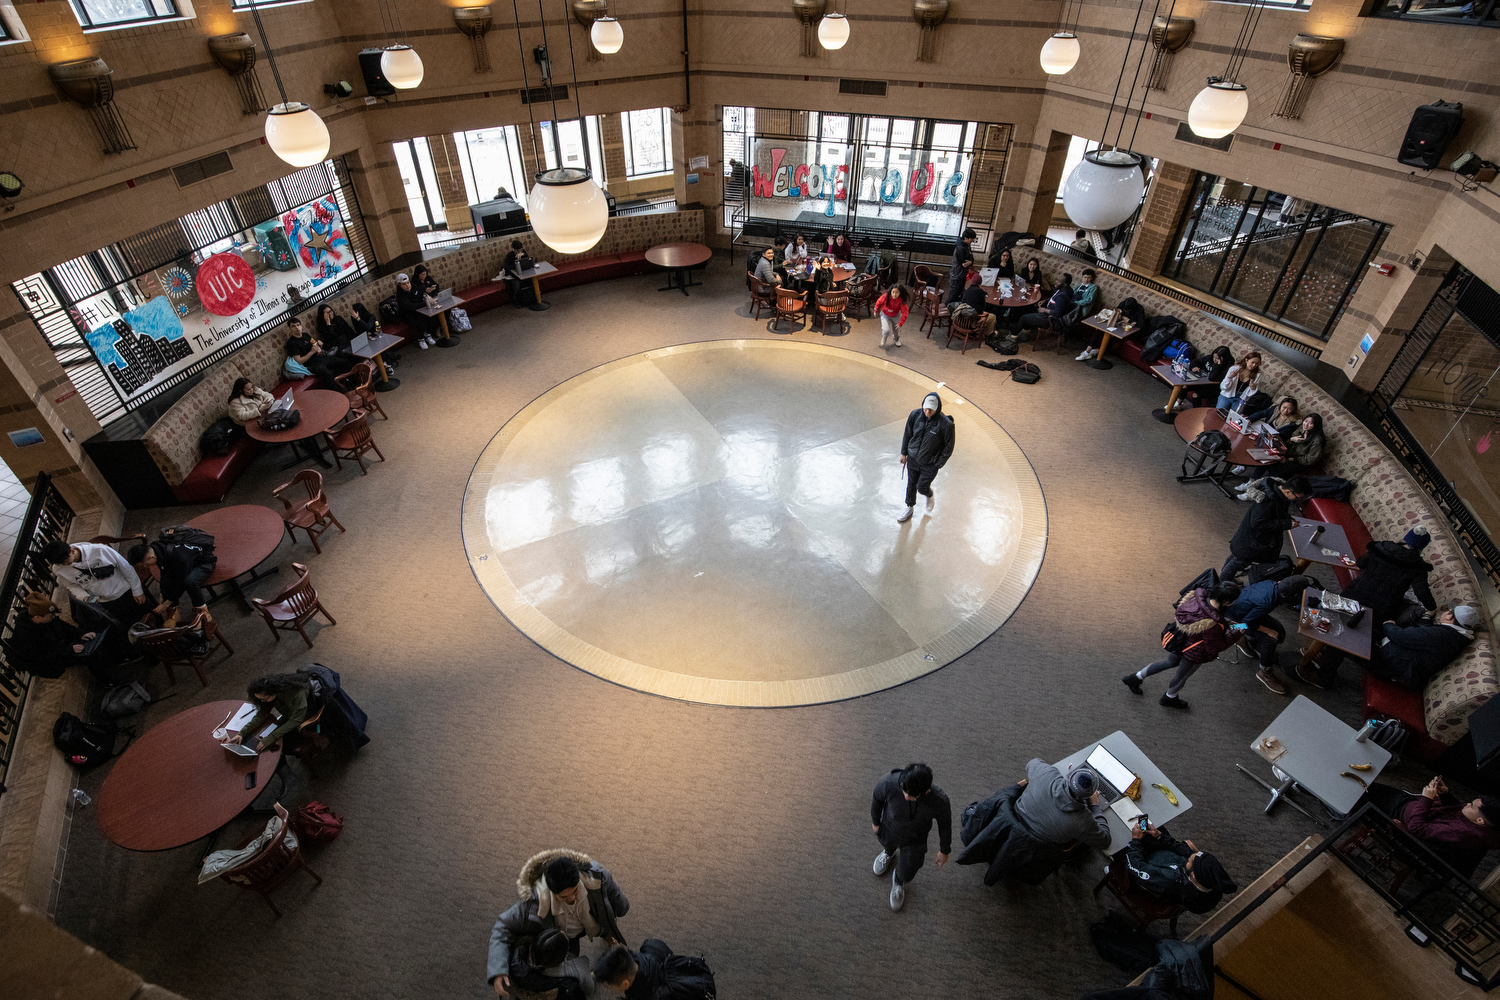 The atrium of SRCN comes to life as students catch up with each other upon returning to campus for the semester.